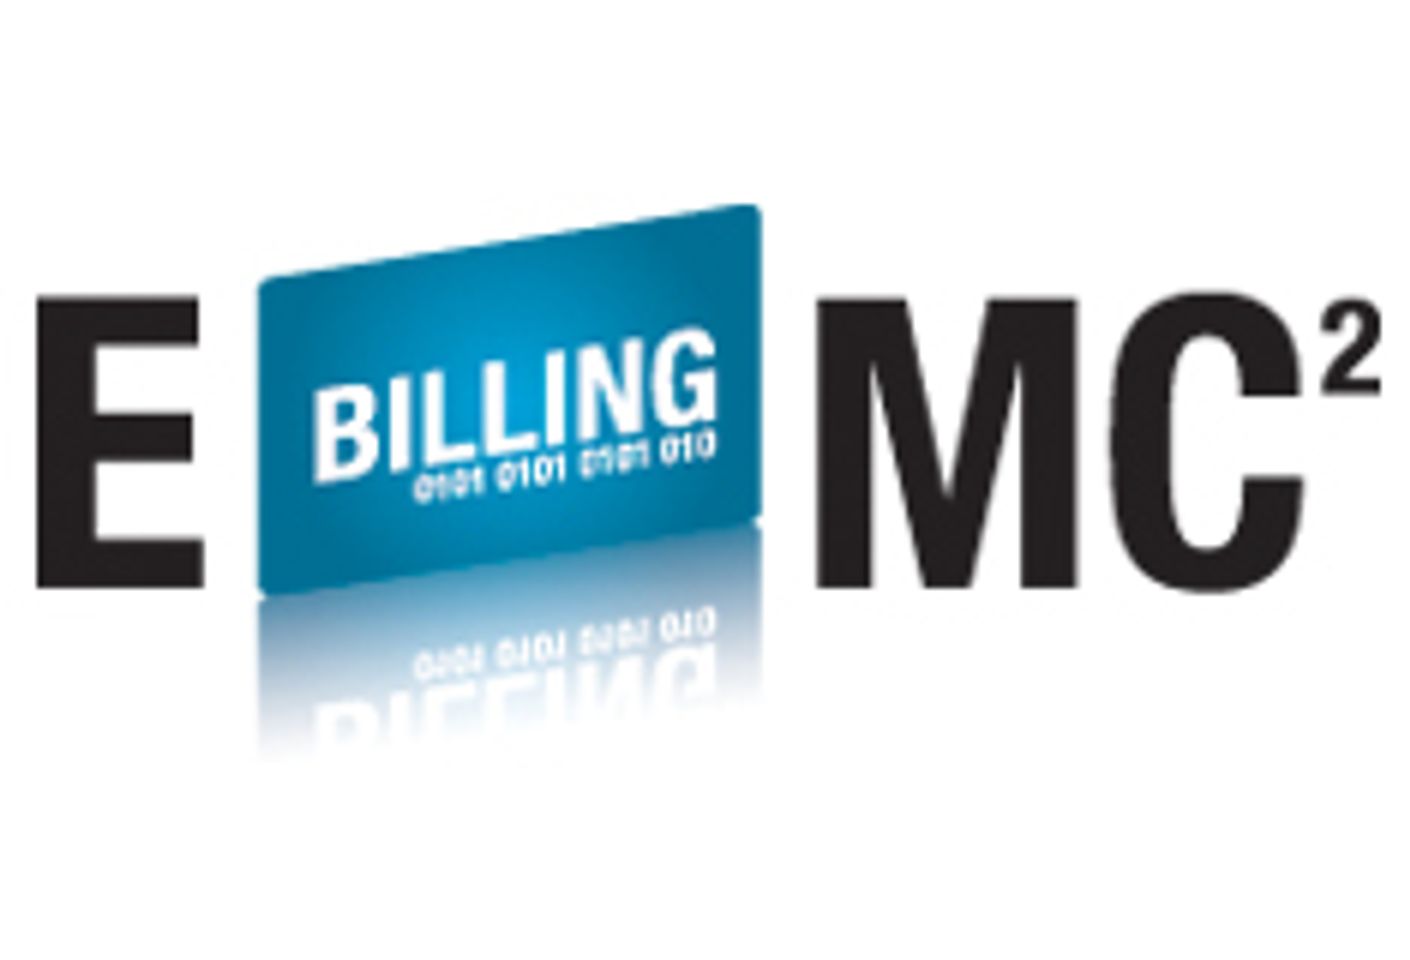 EMC2Billing Teams with Payment Network's DIRECTebanking